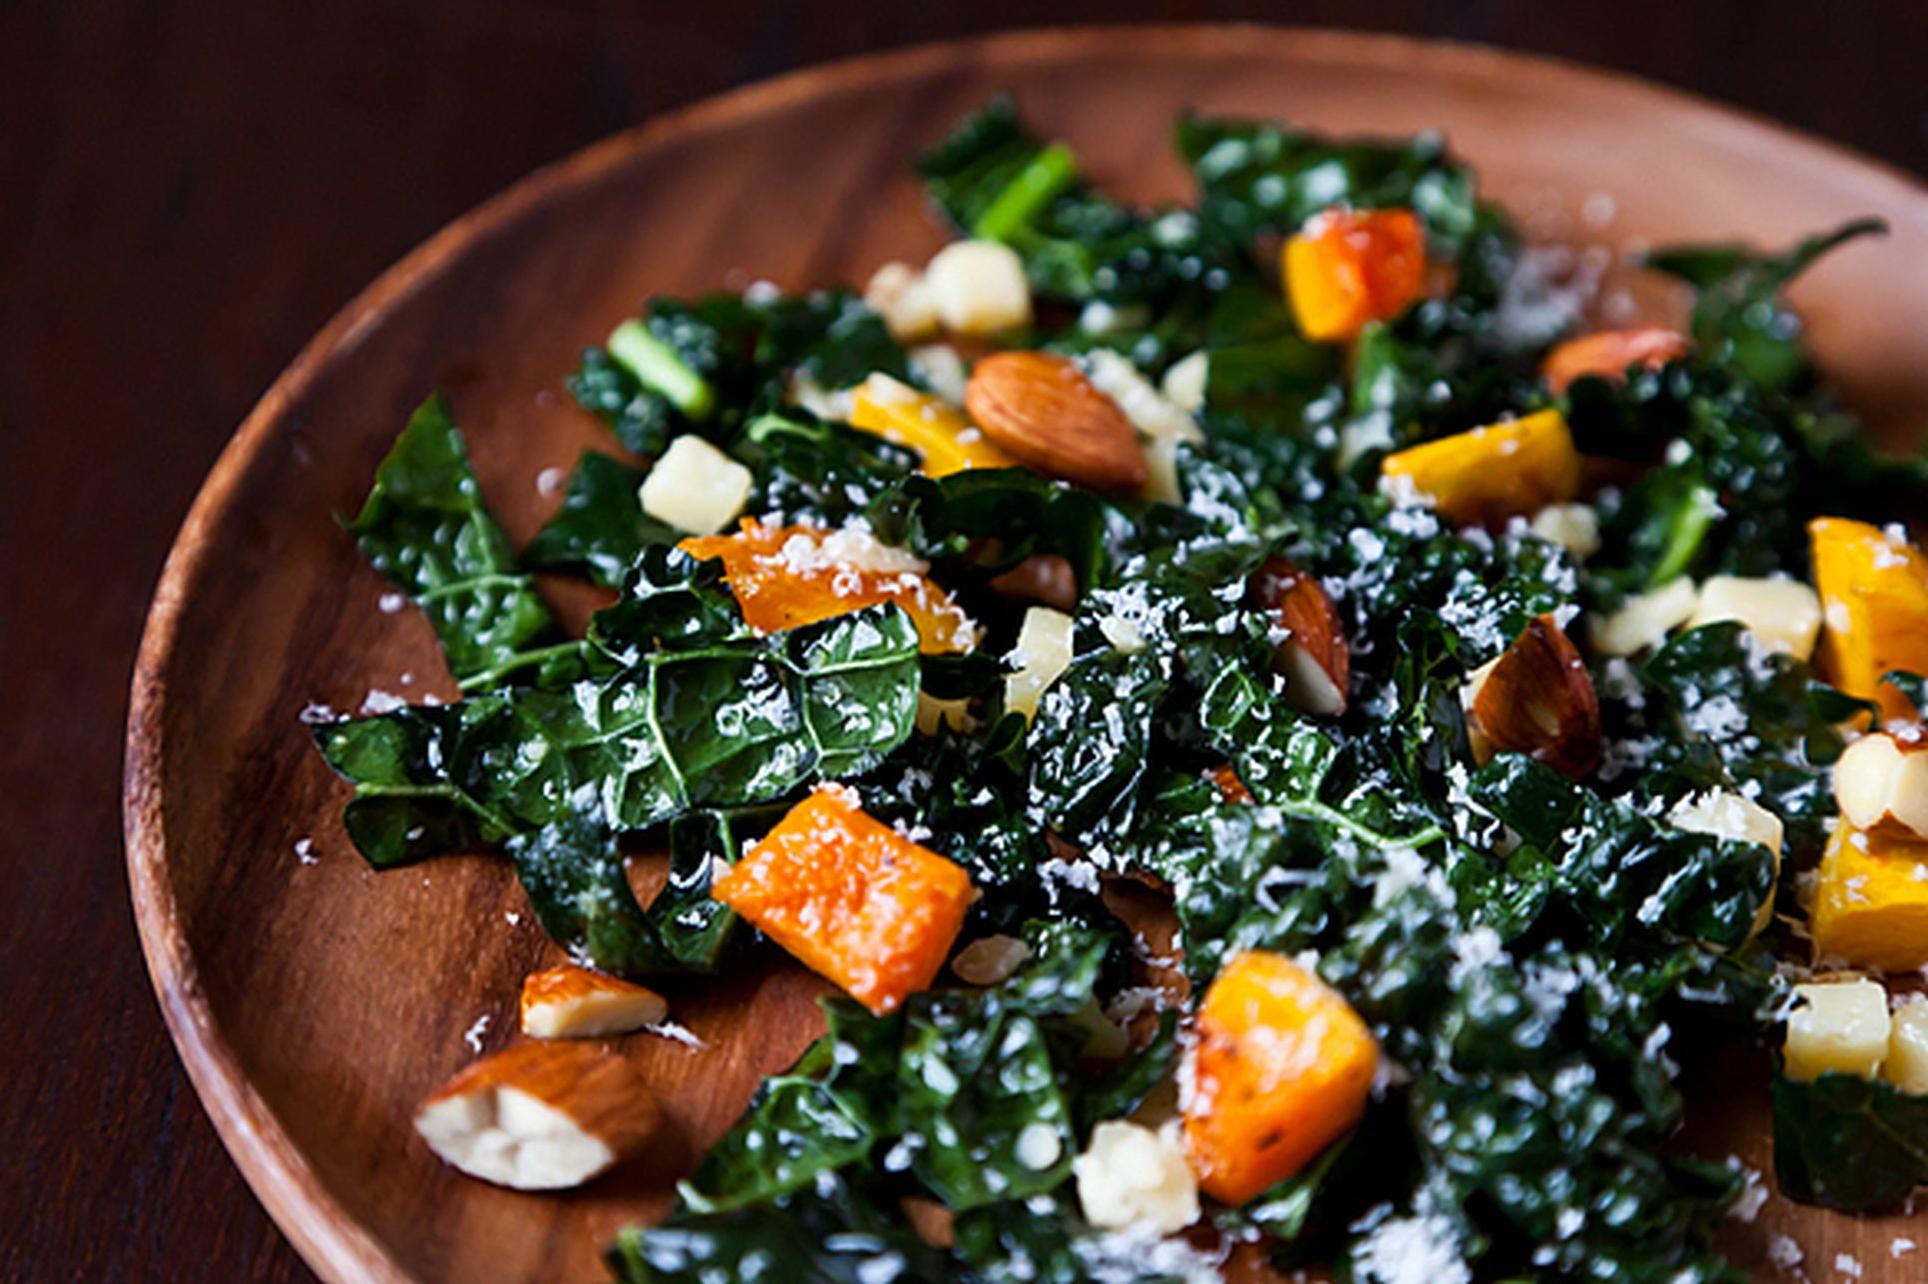  The vibrant colors and textures of this Kale & Squash Salad will make your taste buds dance!